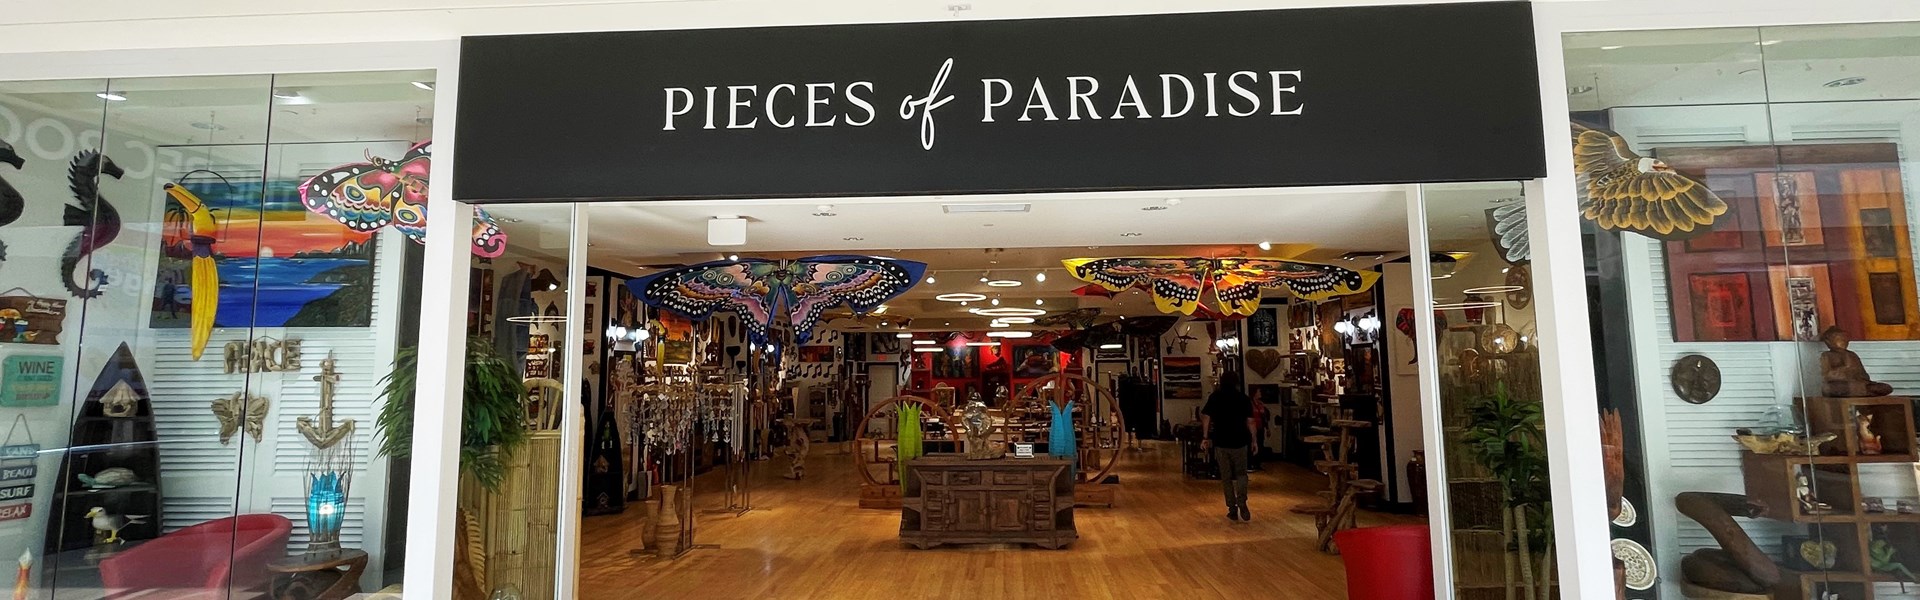 Pieces of Paradise